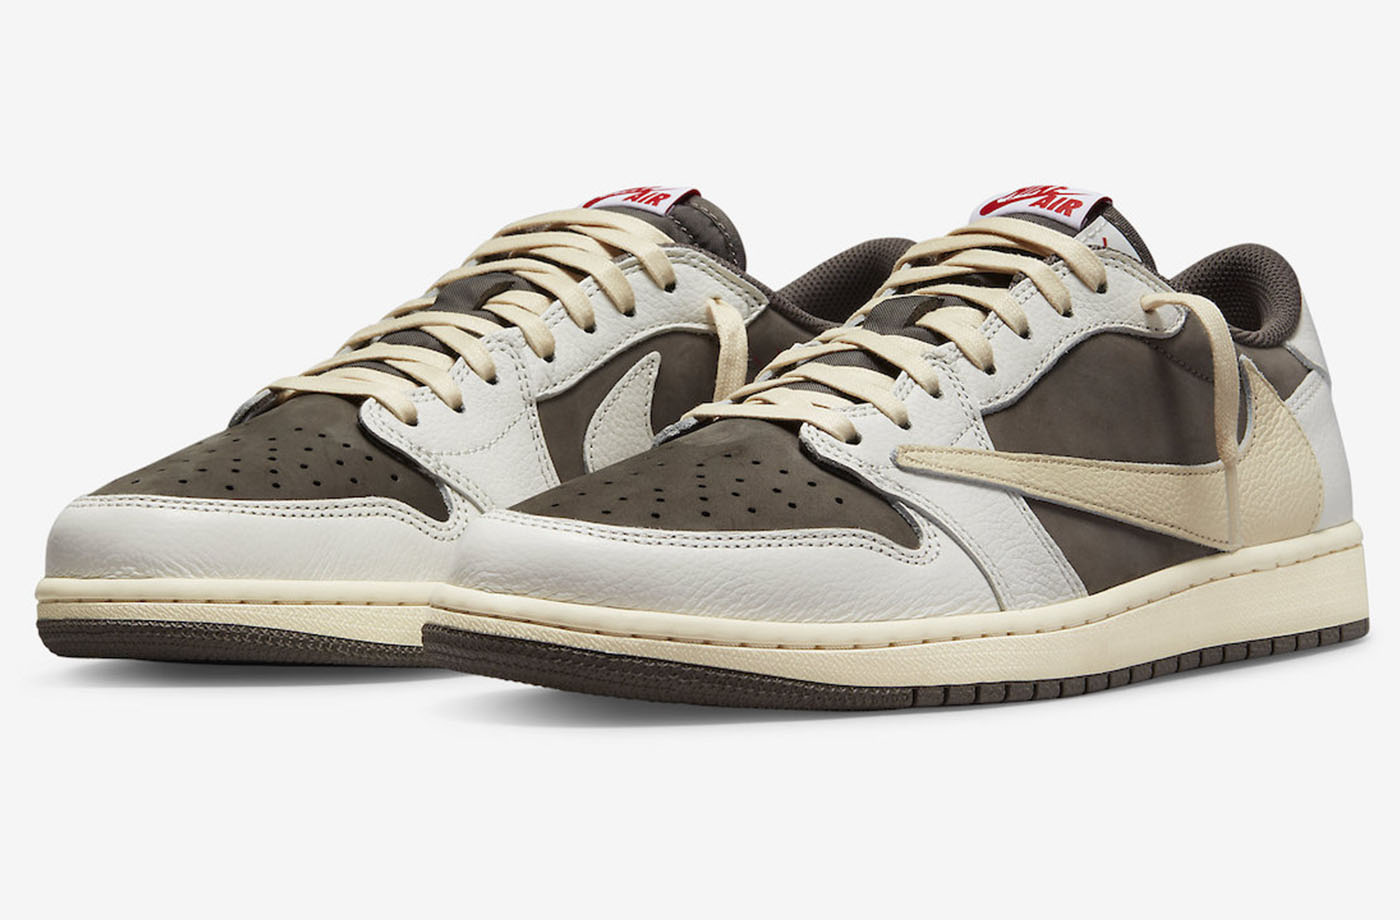 NEW ARRIVAL】🎈The new colorway of the Travis Scott x Air Jordan 1 Low  Reverse Mocha has arrived and is said to be retailing in 2022🌵⚡. :  r/BoostMasterLin